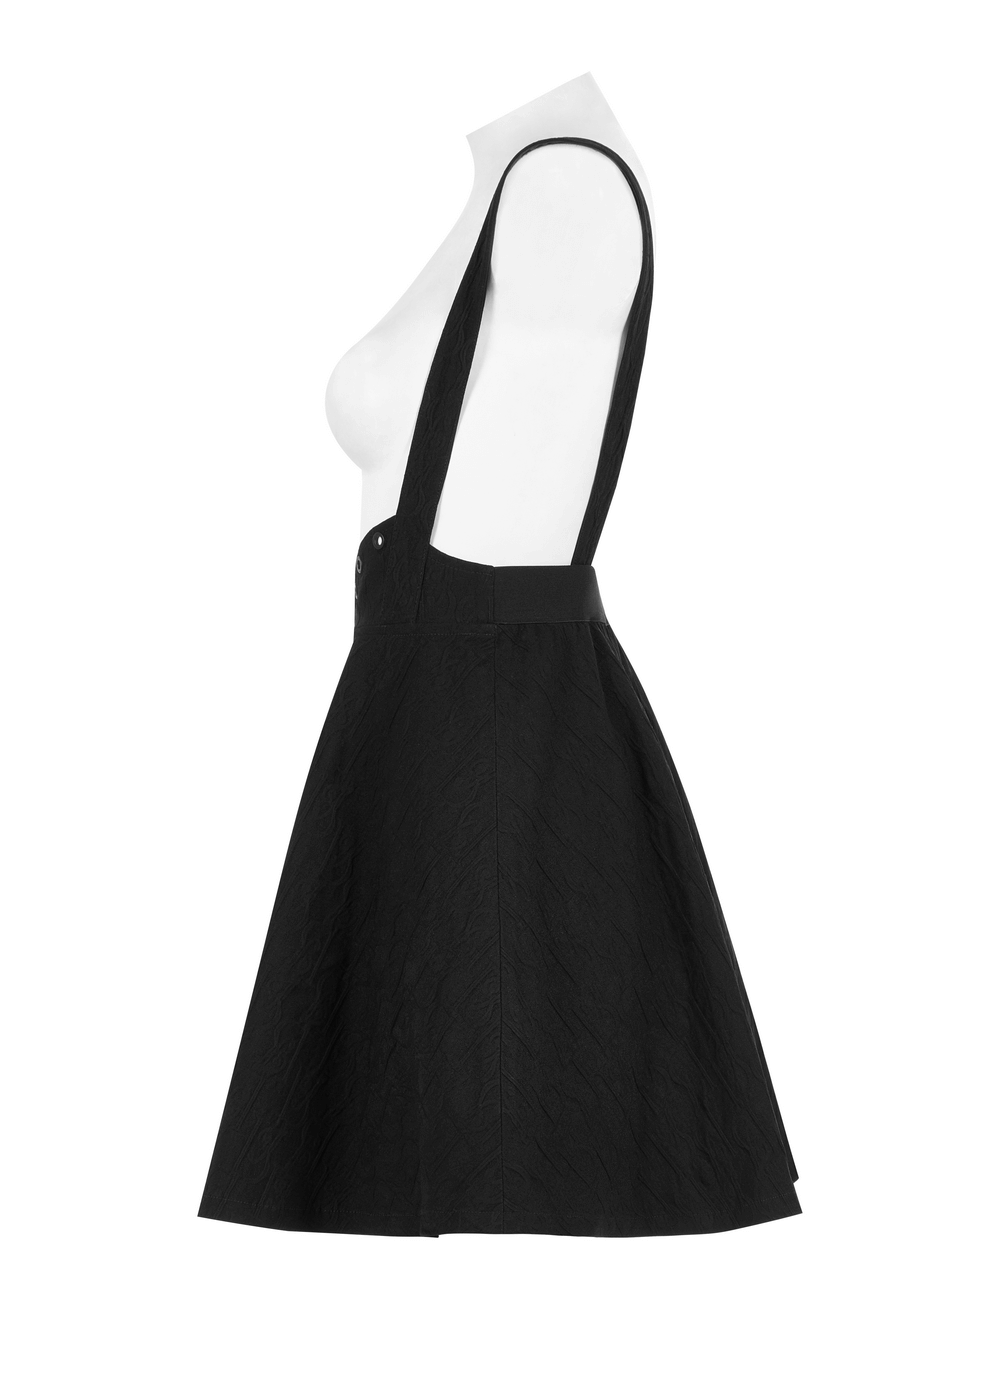 High-Waist Cat Ear Swing Skirt with Gothic Accents